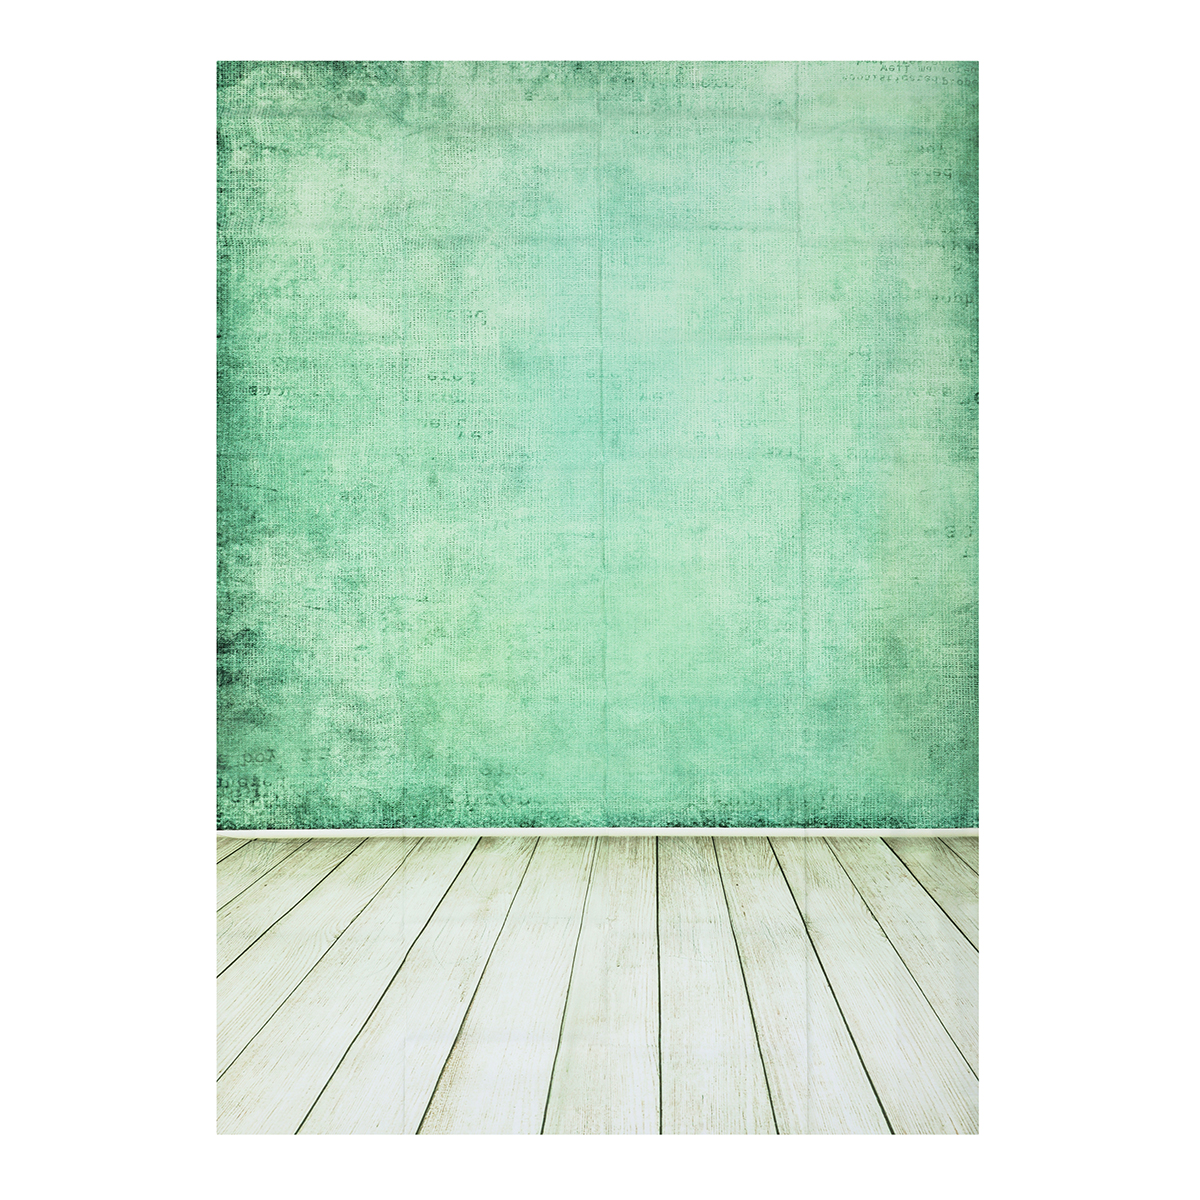 15x21m-Silk-Material-Light-Green-Cement-Wall-Wooden-Pattern-Photo-Background-Cloth-Photography-Backd-1974943-2